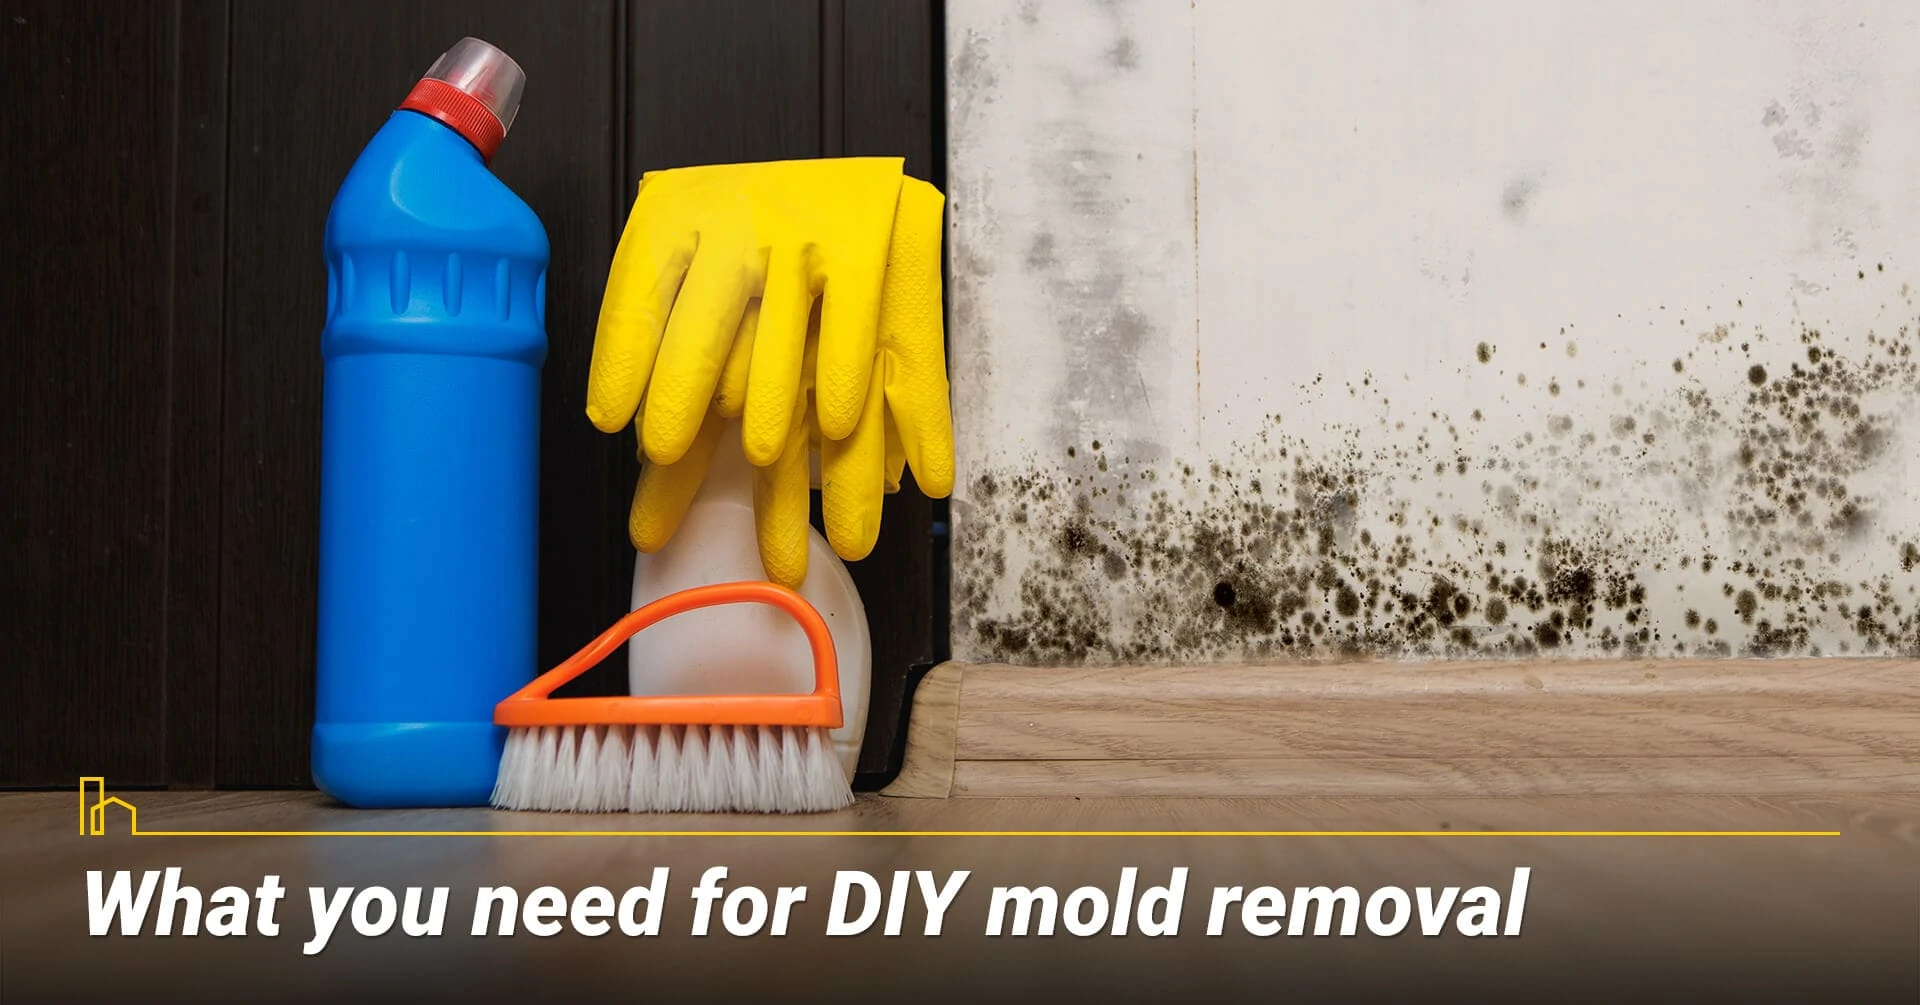 What you need for DIY mold removal, supplies you need to remove mold yourself